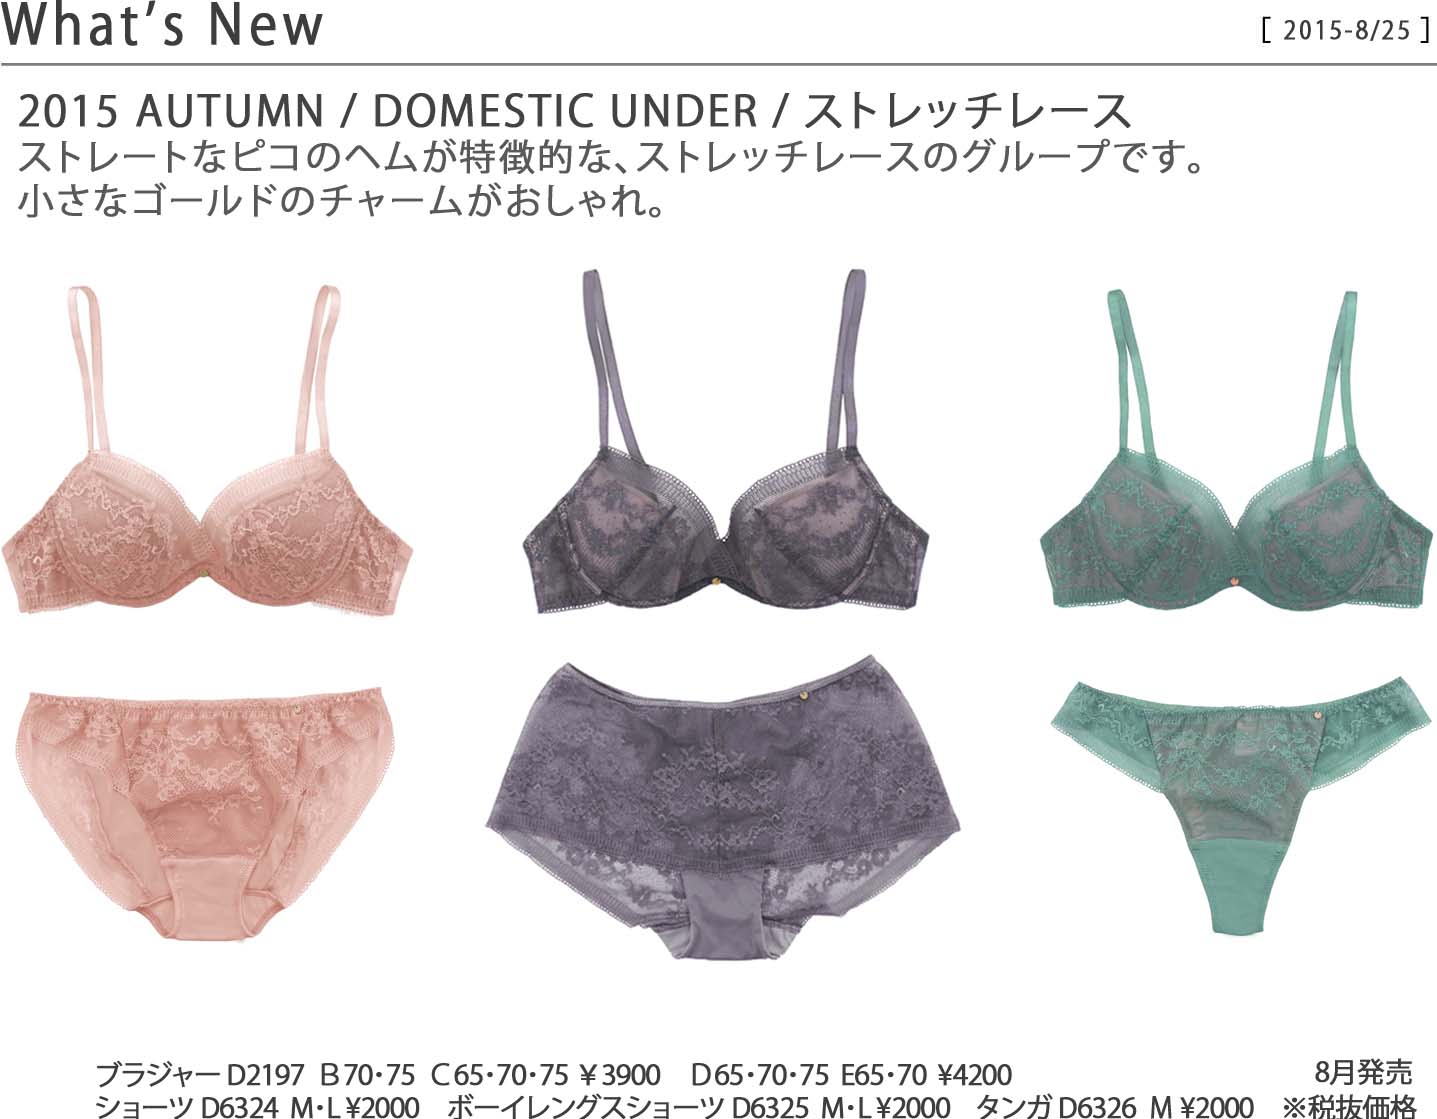 What's New\ストレッチレース